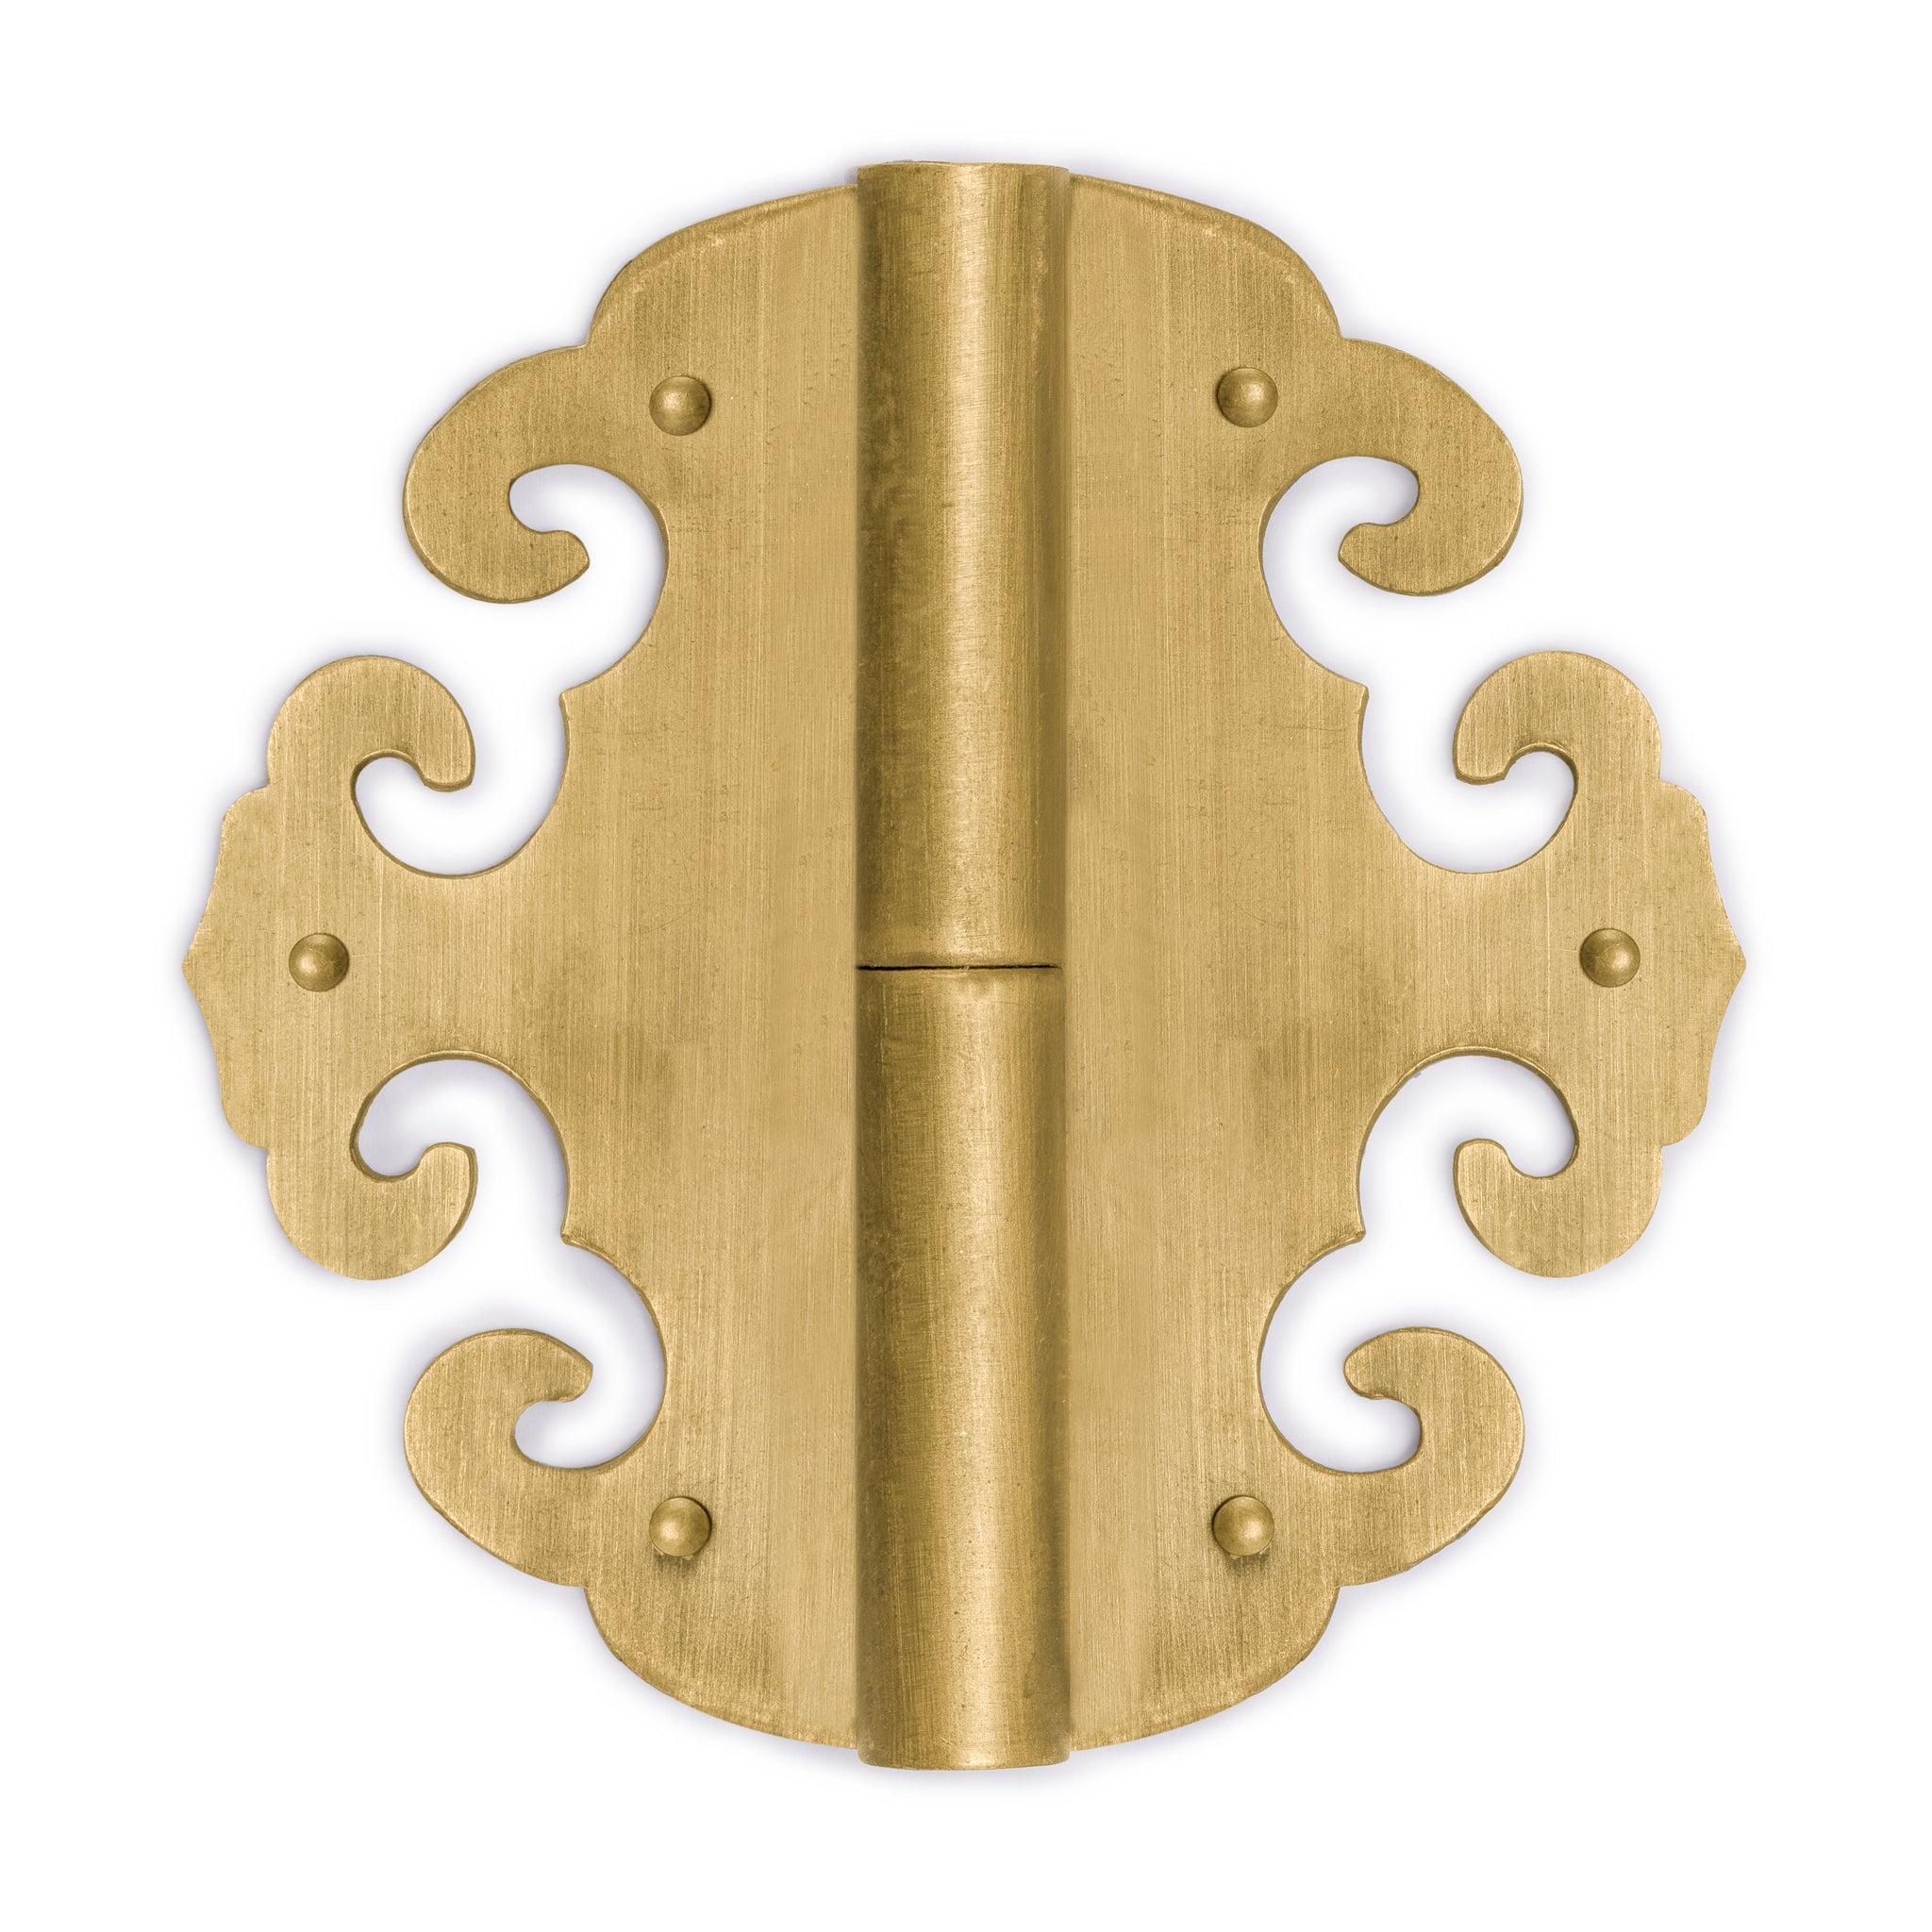 Four Flowers Hinges 3.1" x 3.1" - Set of 2-Chinese Brass Hardware